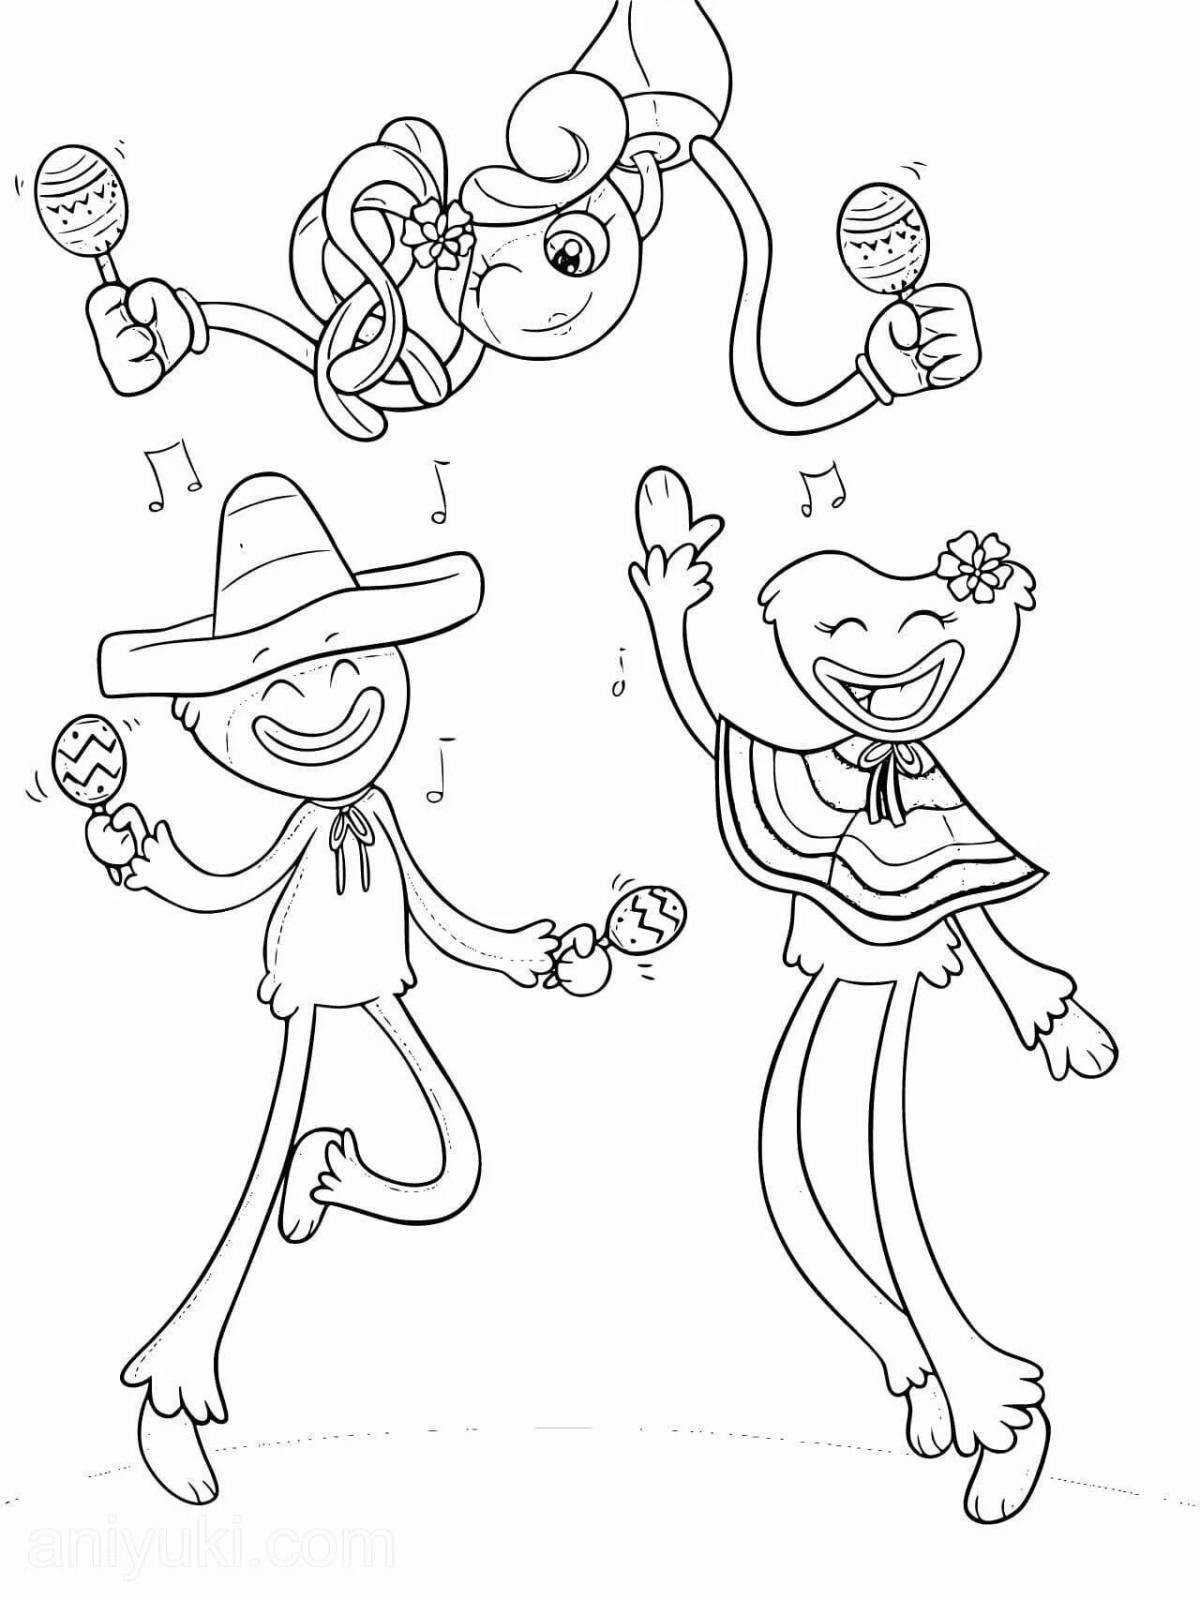 Splendid coloring page pony play time 2 chapter